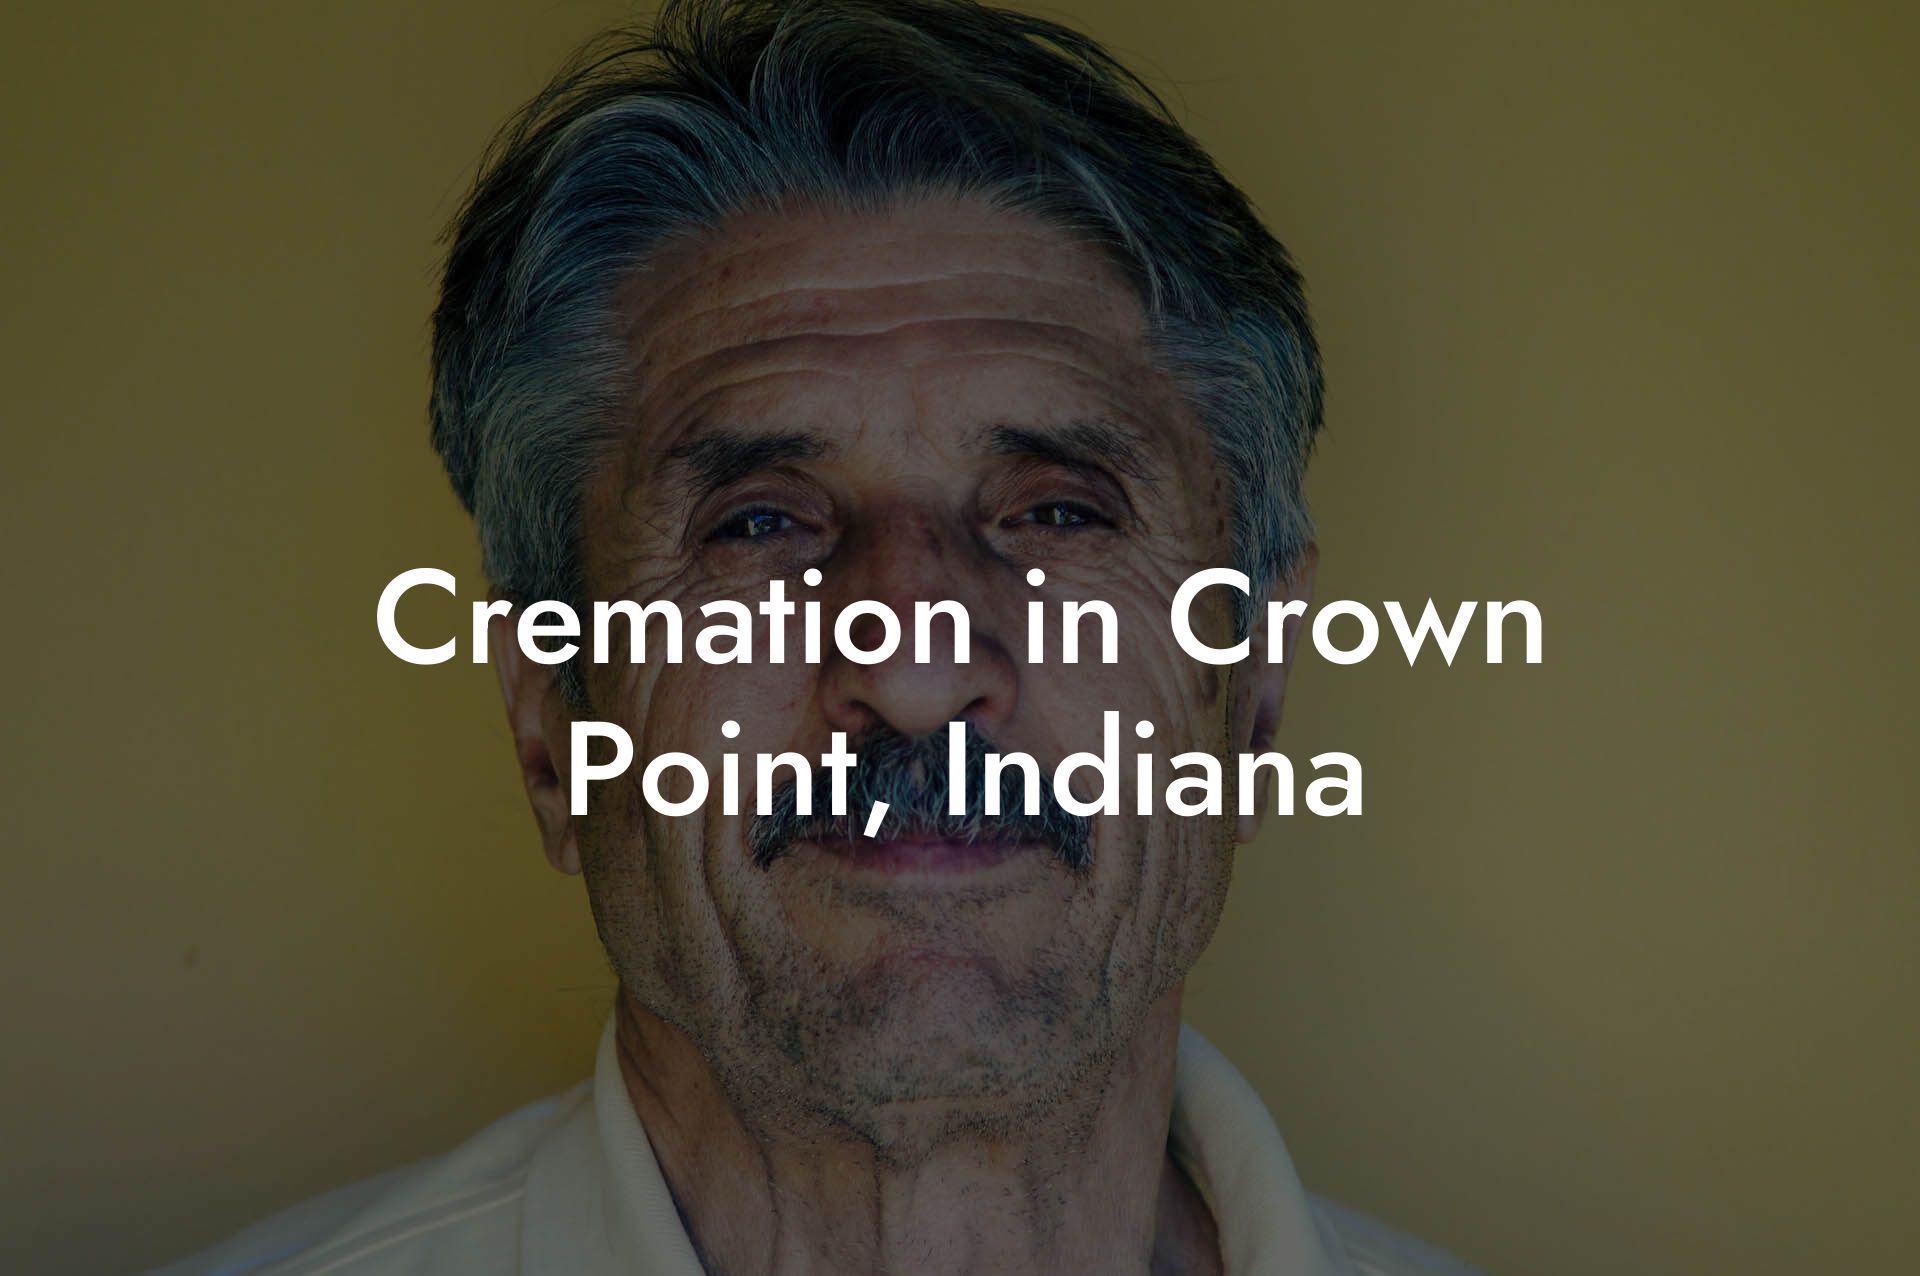 Cremation in Crown Point, Indiana